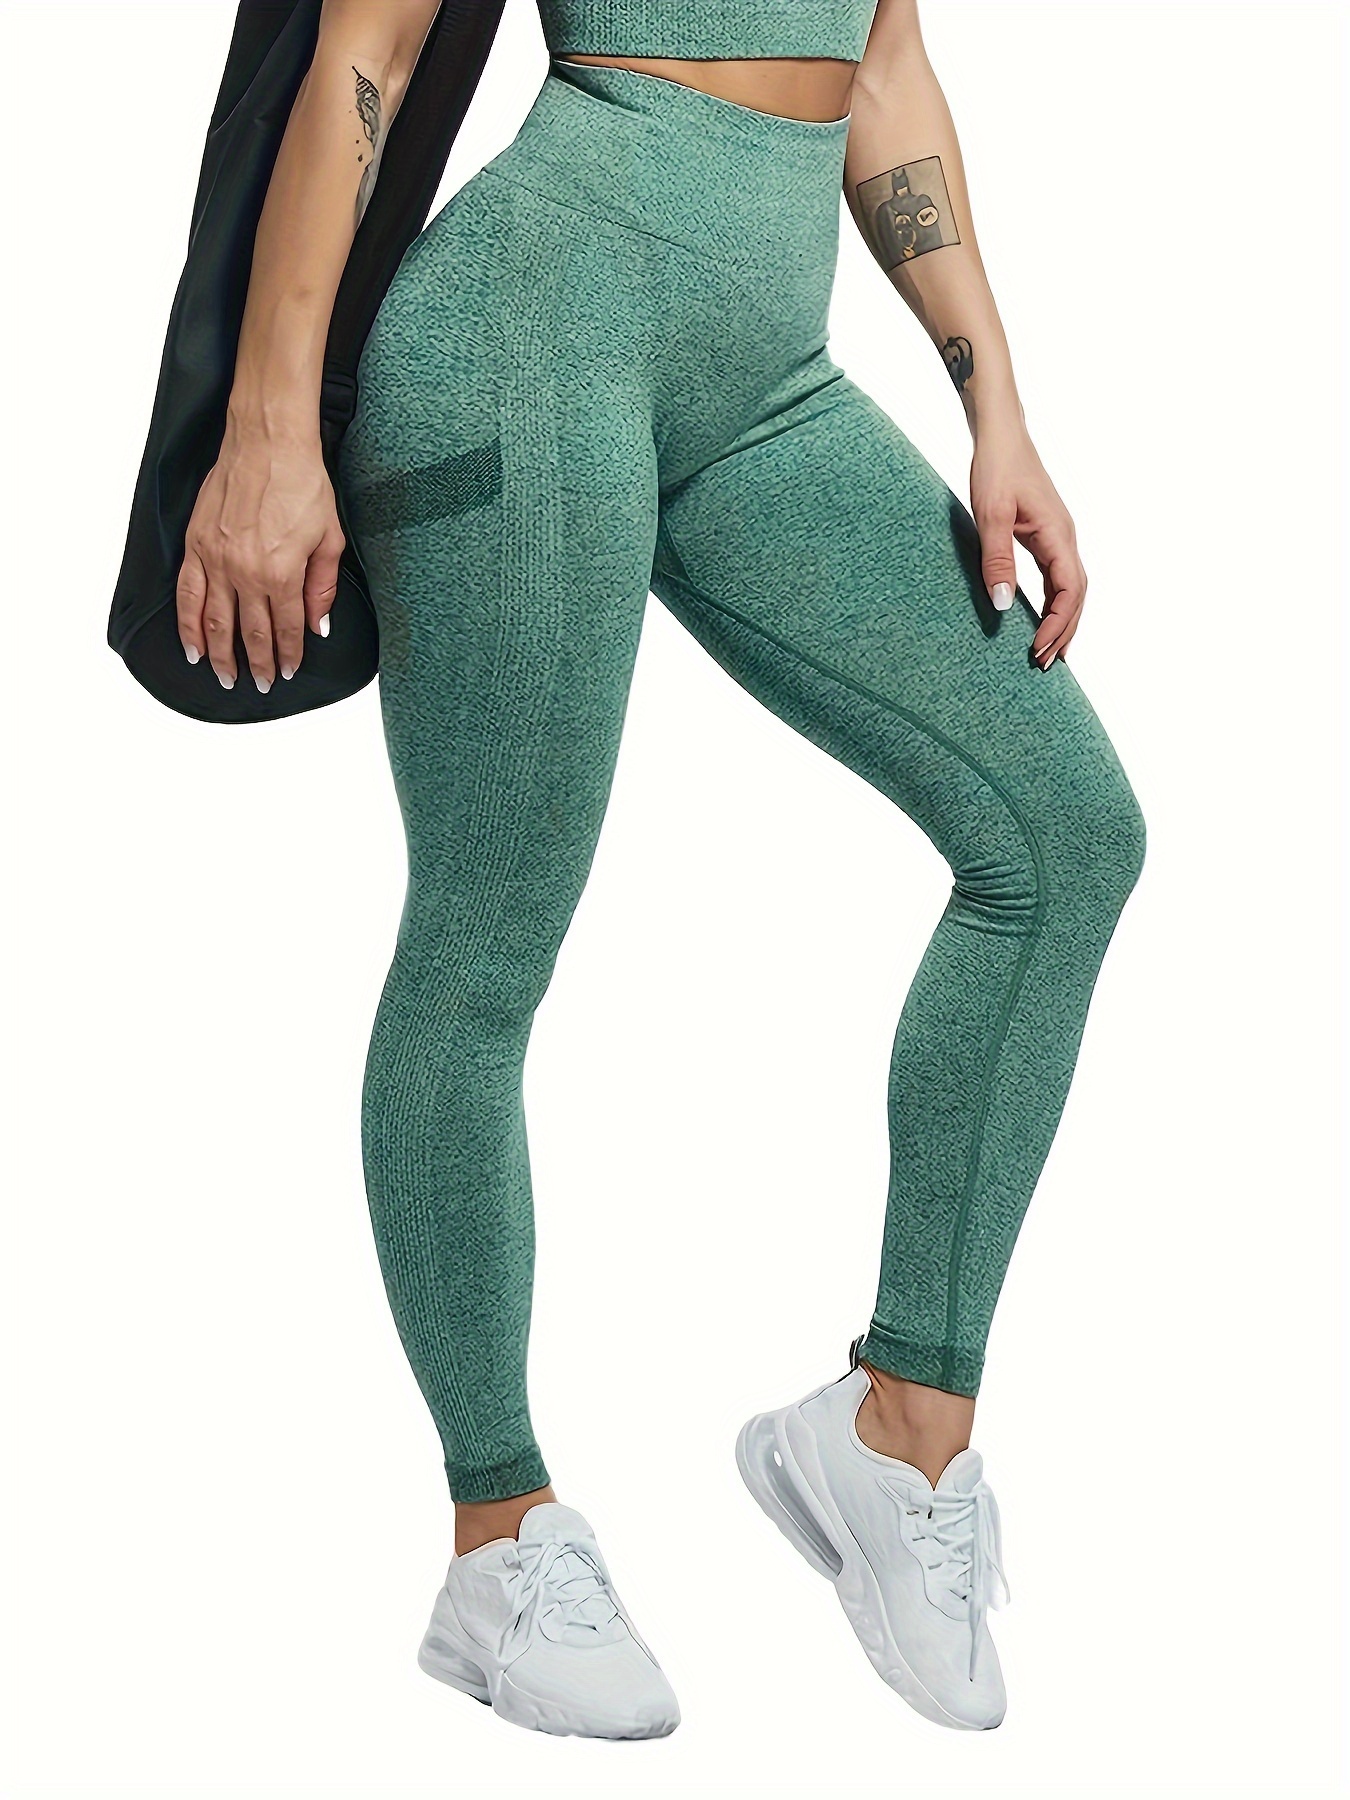 High Waist Naked Material Offline Yoga Pants For Women Solid Color Sports  Gym Leggings With Elastic Fit For Fitness And Overall Workout LU 32 From  Luyogasports, $14.29